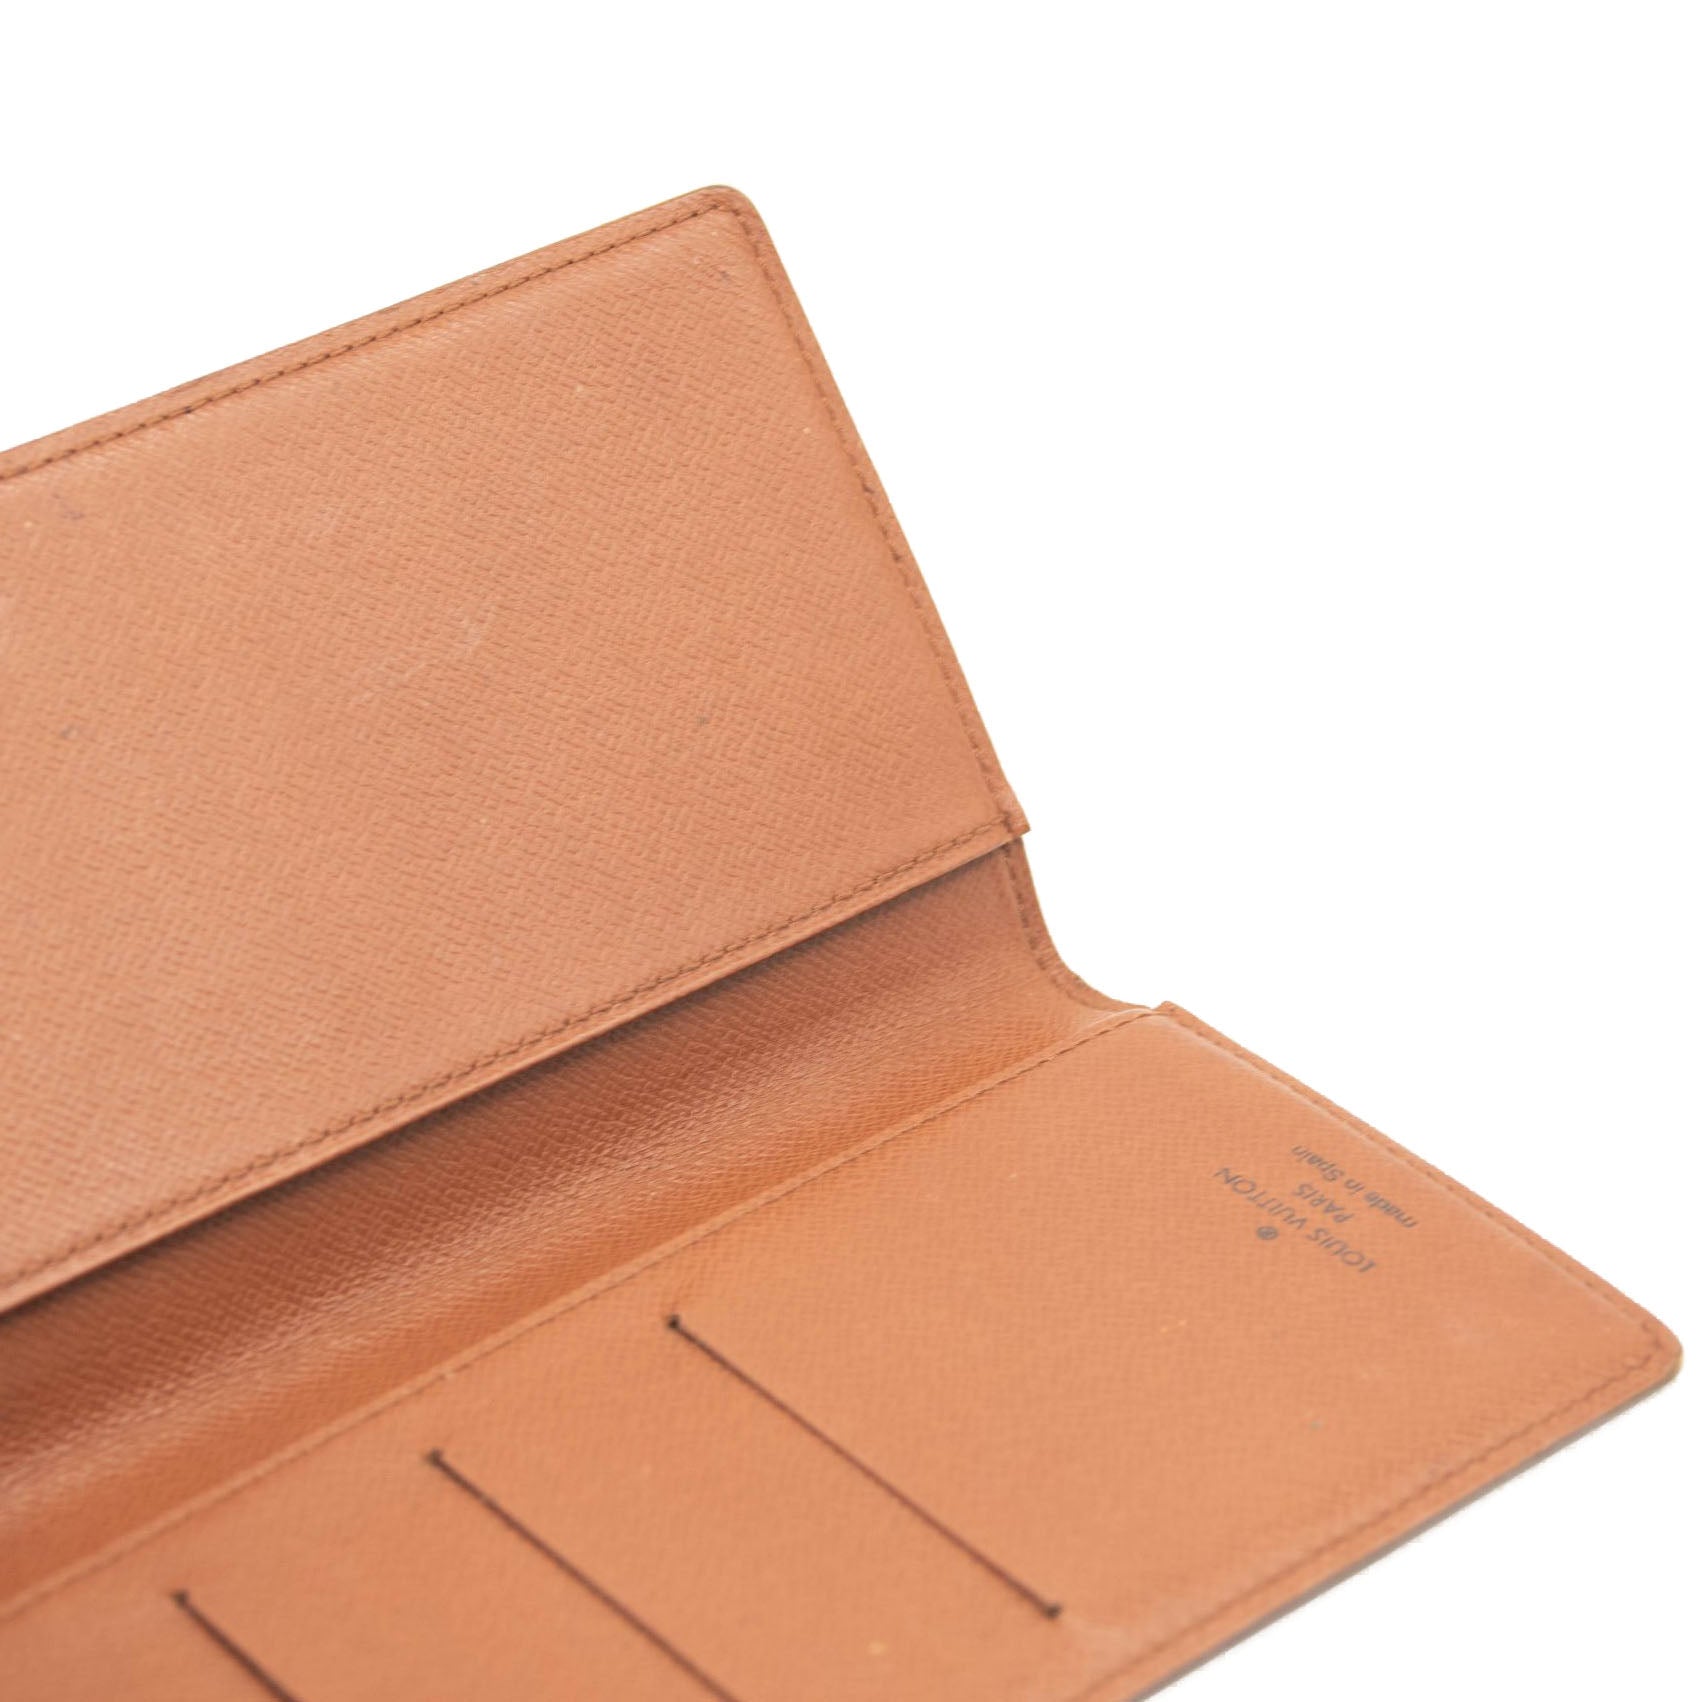 How to use the Louis Vuitton Pocket Agenda as a wallet/checkbook